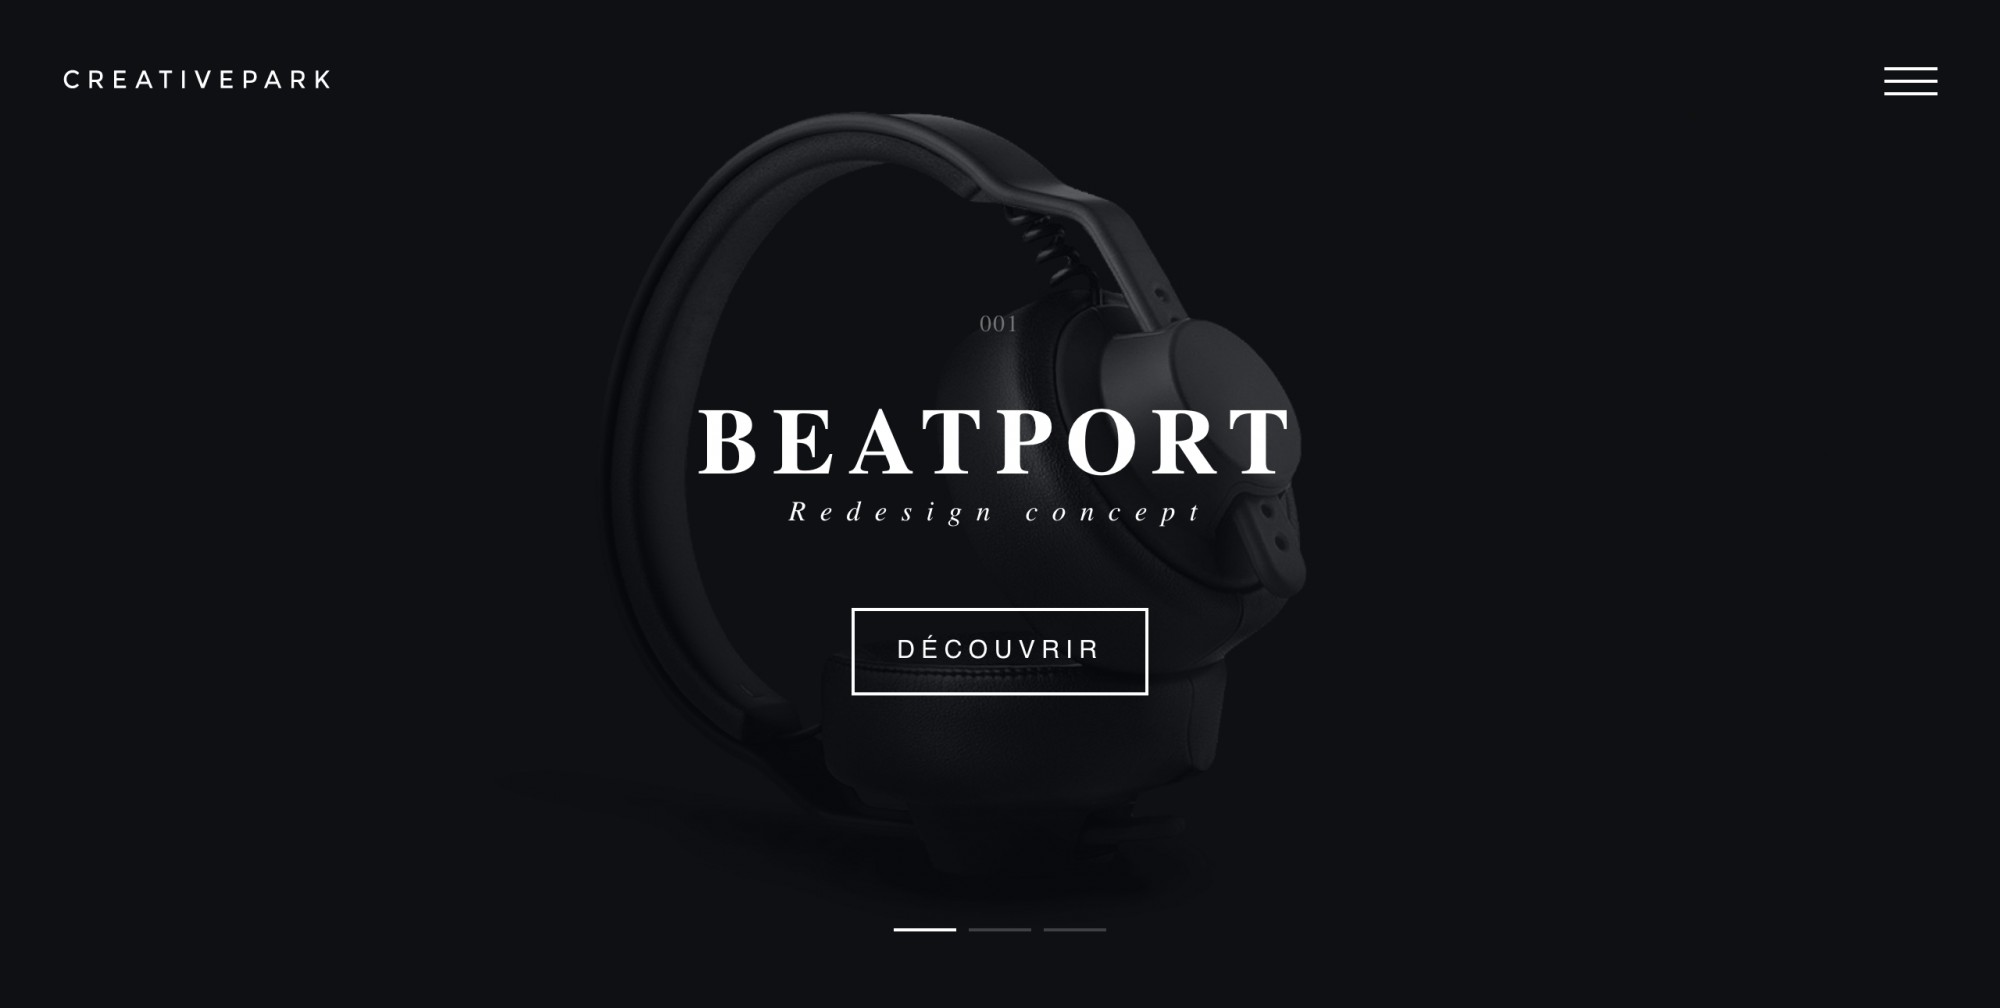 beatport landing where key message and CTA are highlighted with color contrast